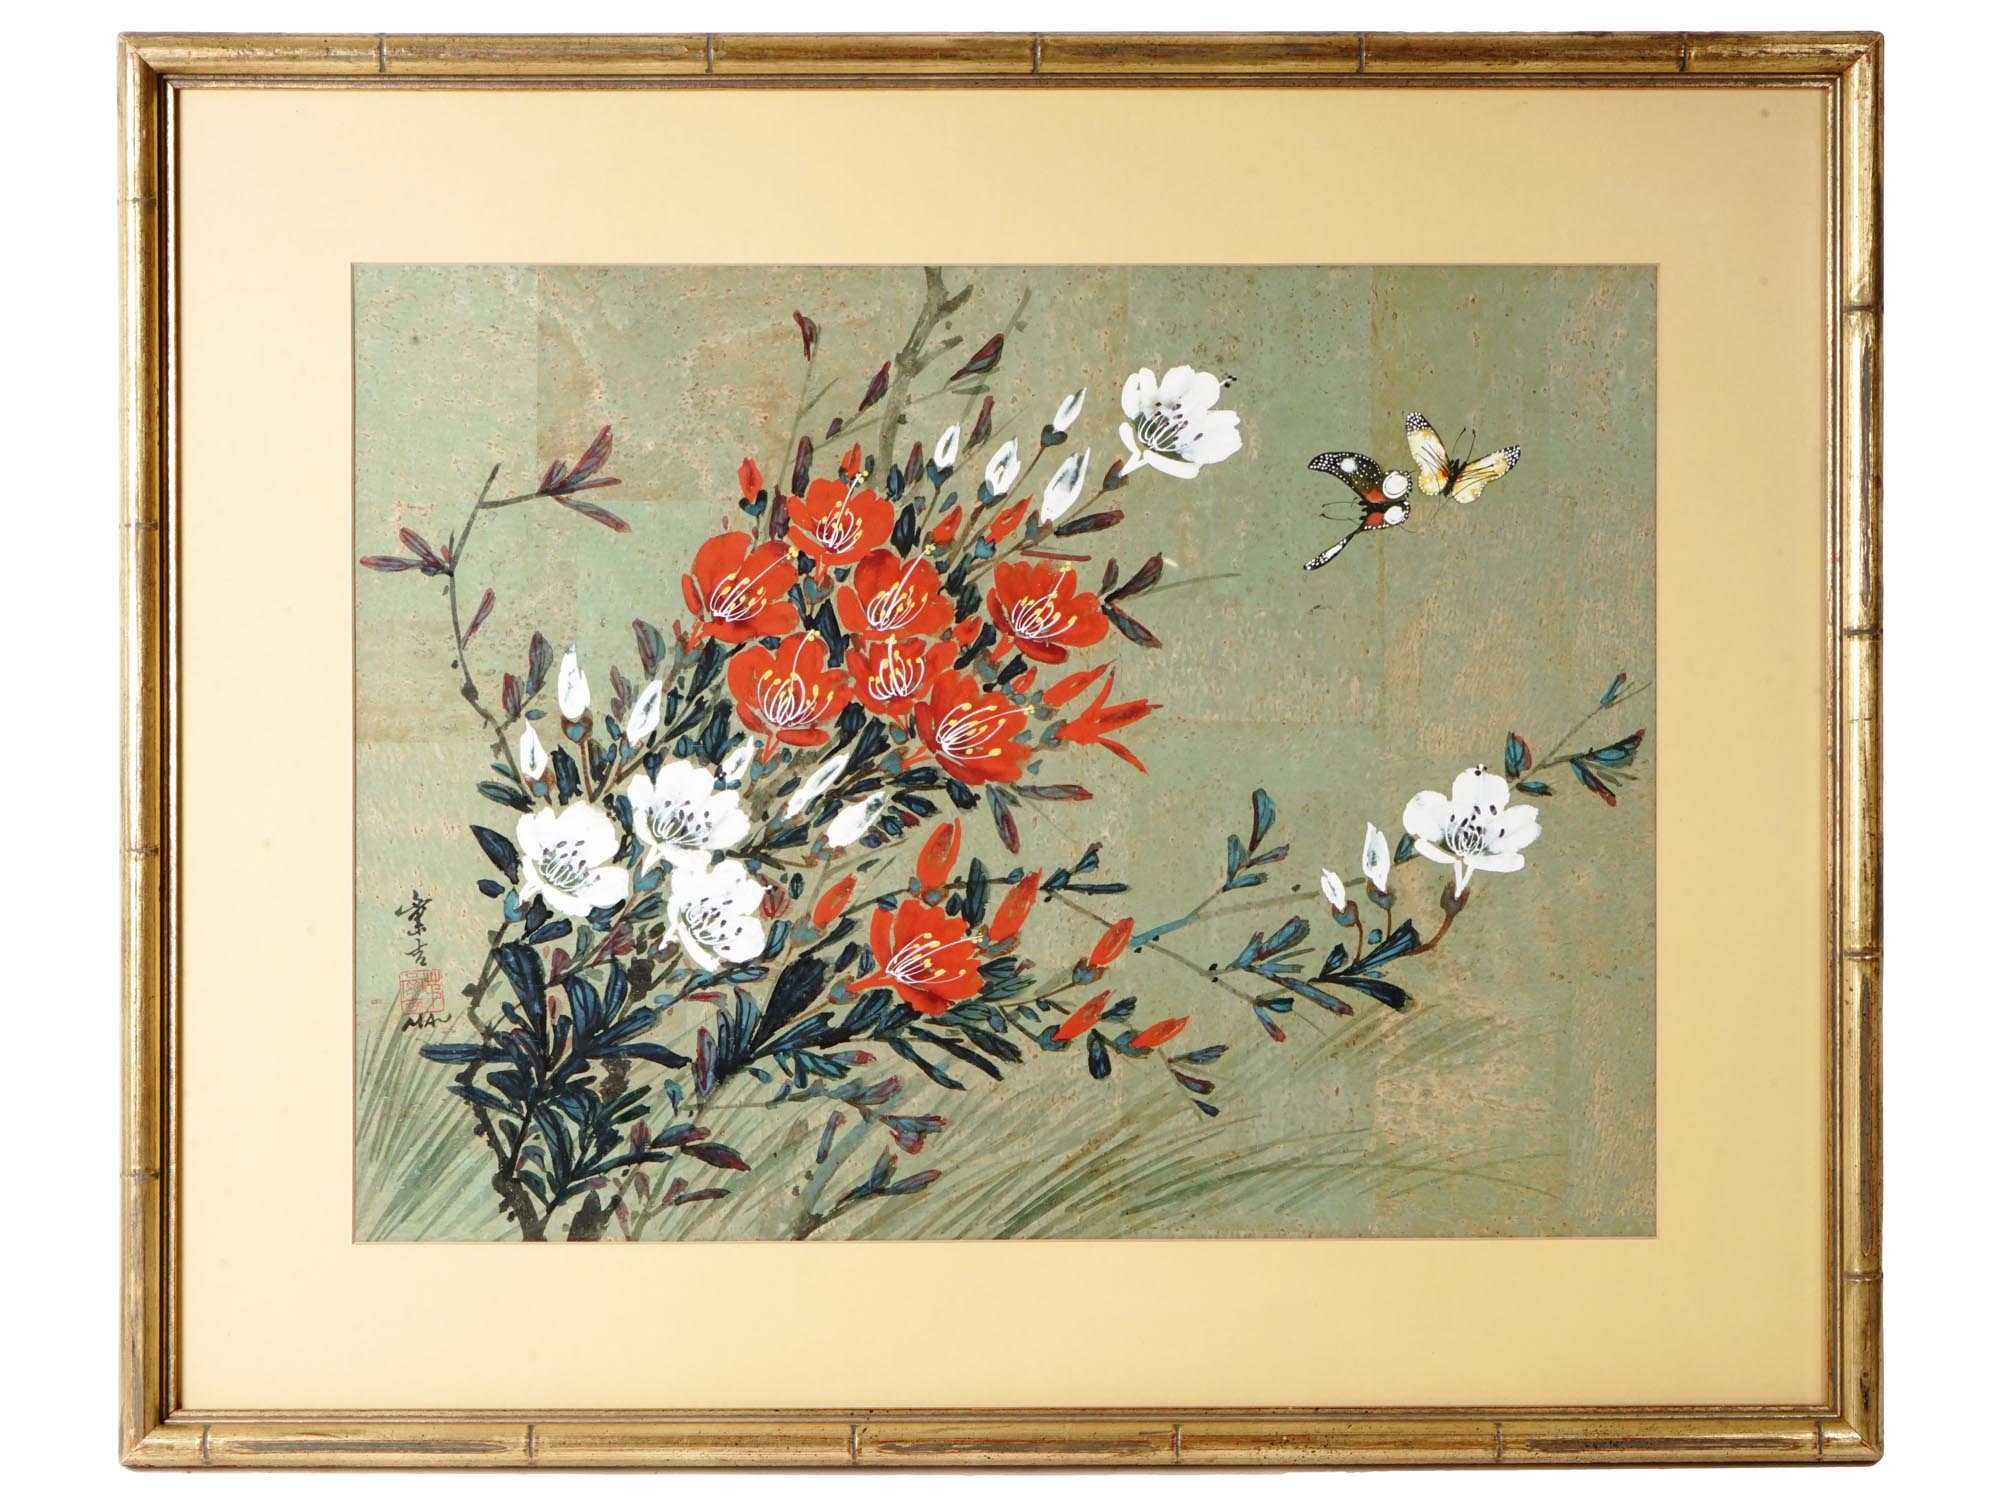 CHINESE FLORAL WATERCOLOR PAINTING BY HUI CHI MAU PIC-0